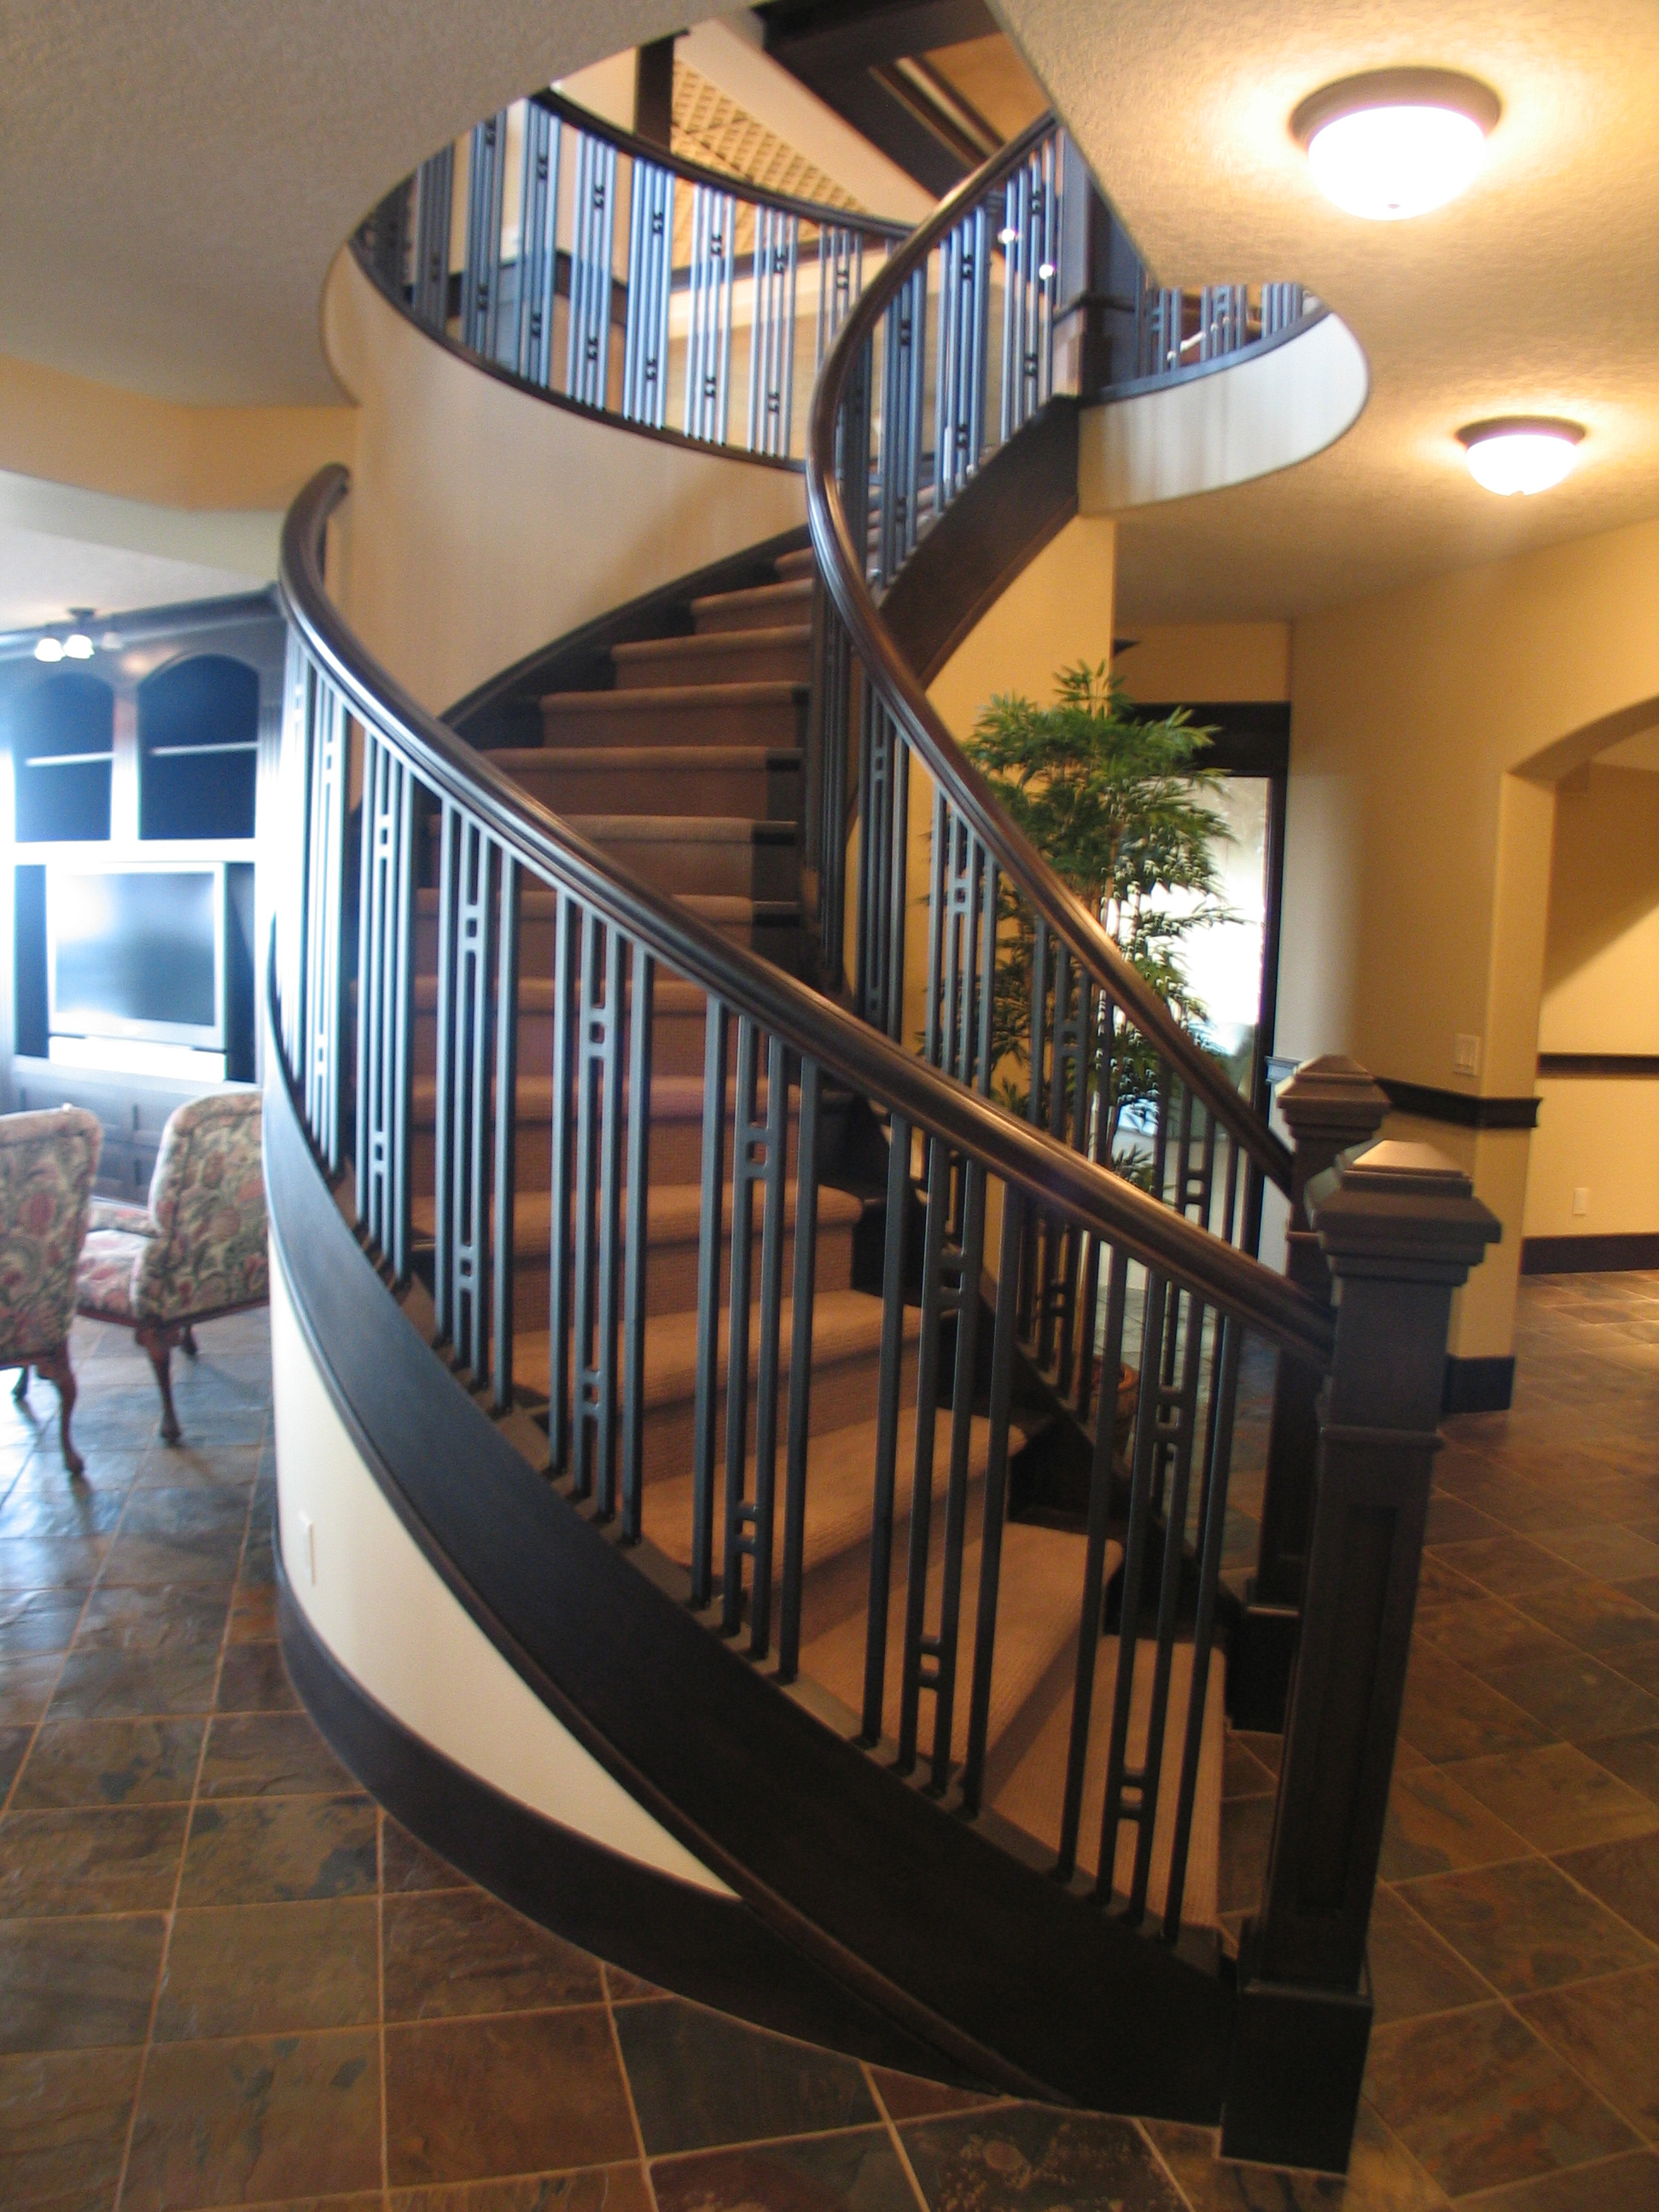 Wrought Iron Railings: An Elegant Design Option | Artistic Stairs Canada